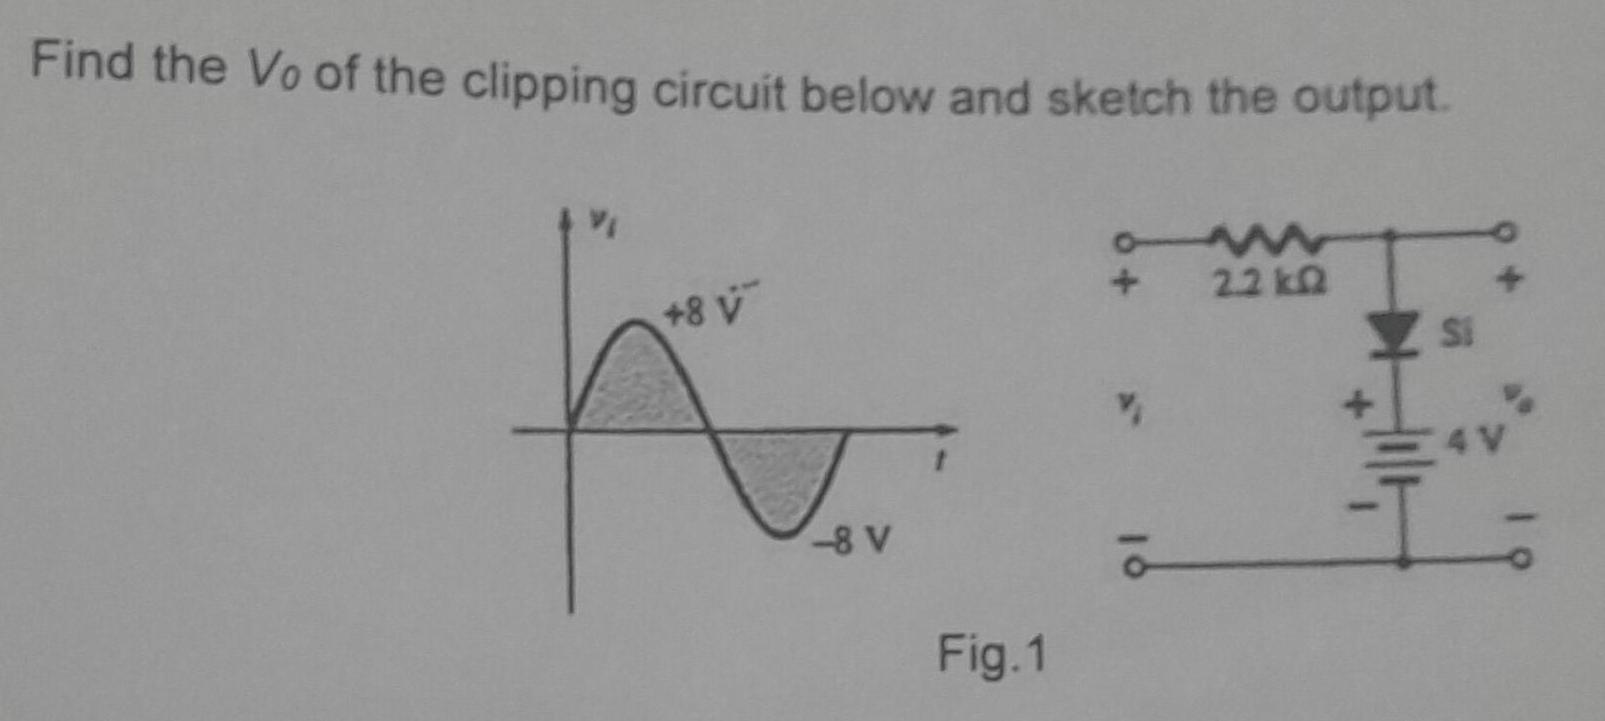 Find the Vo of the clipping circuit below and sketch the output. www 2.2kQ +8 v -8 V Fig.1 V Si